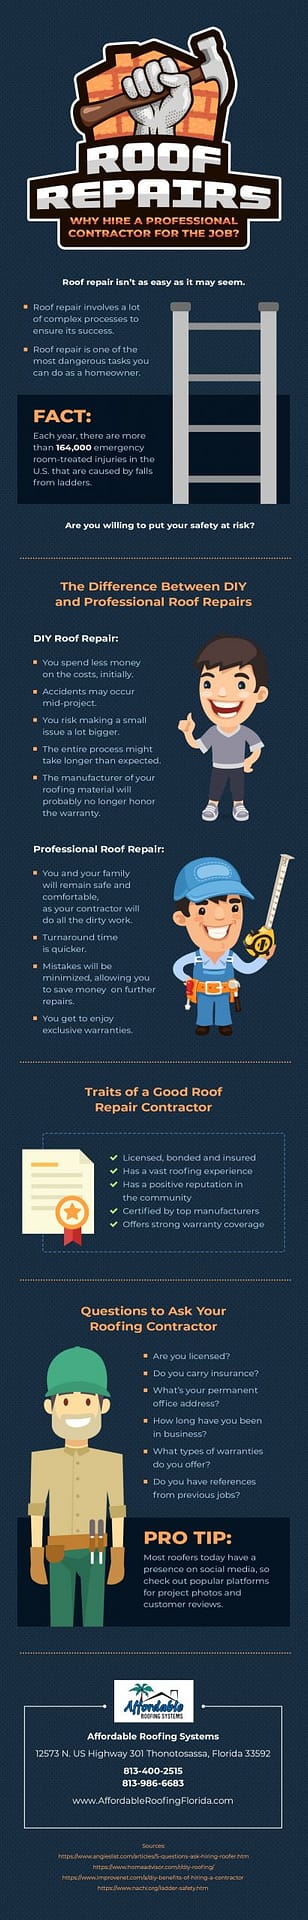 Infographic-Roof-Repairs-Why-Hire-a-Professional-Contractor-to-Do-the-Job